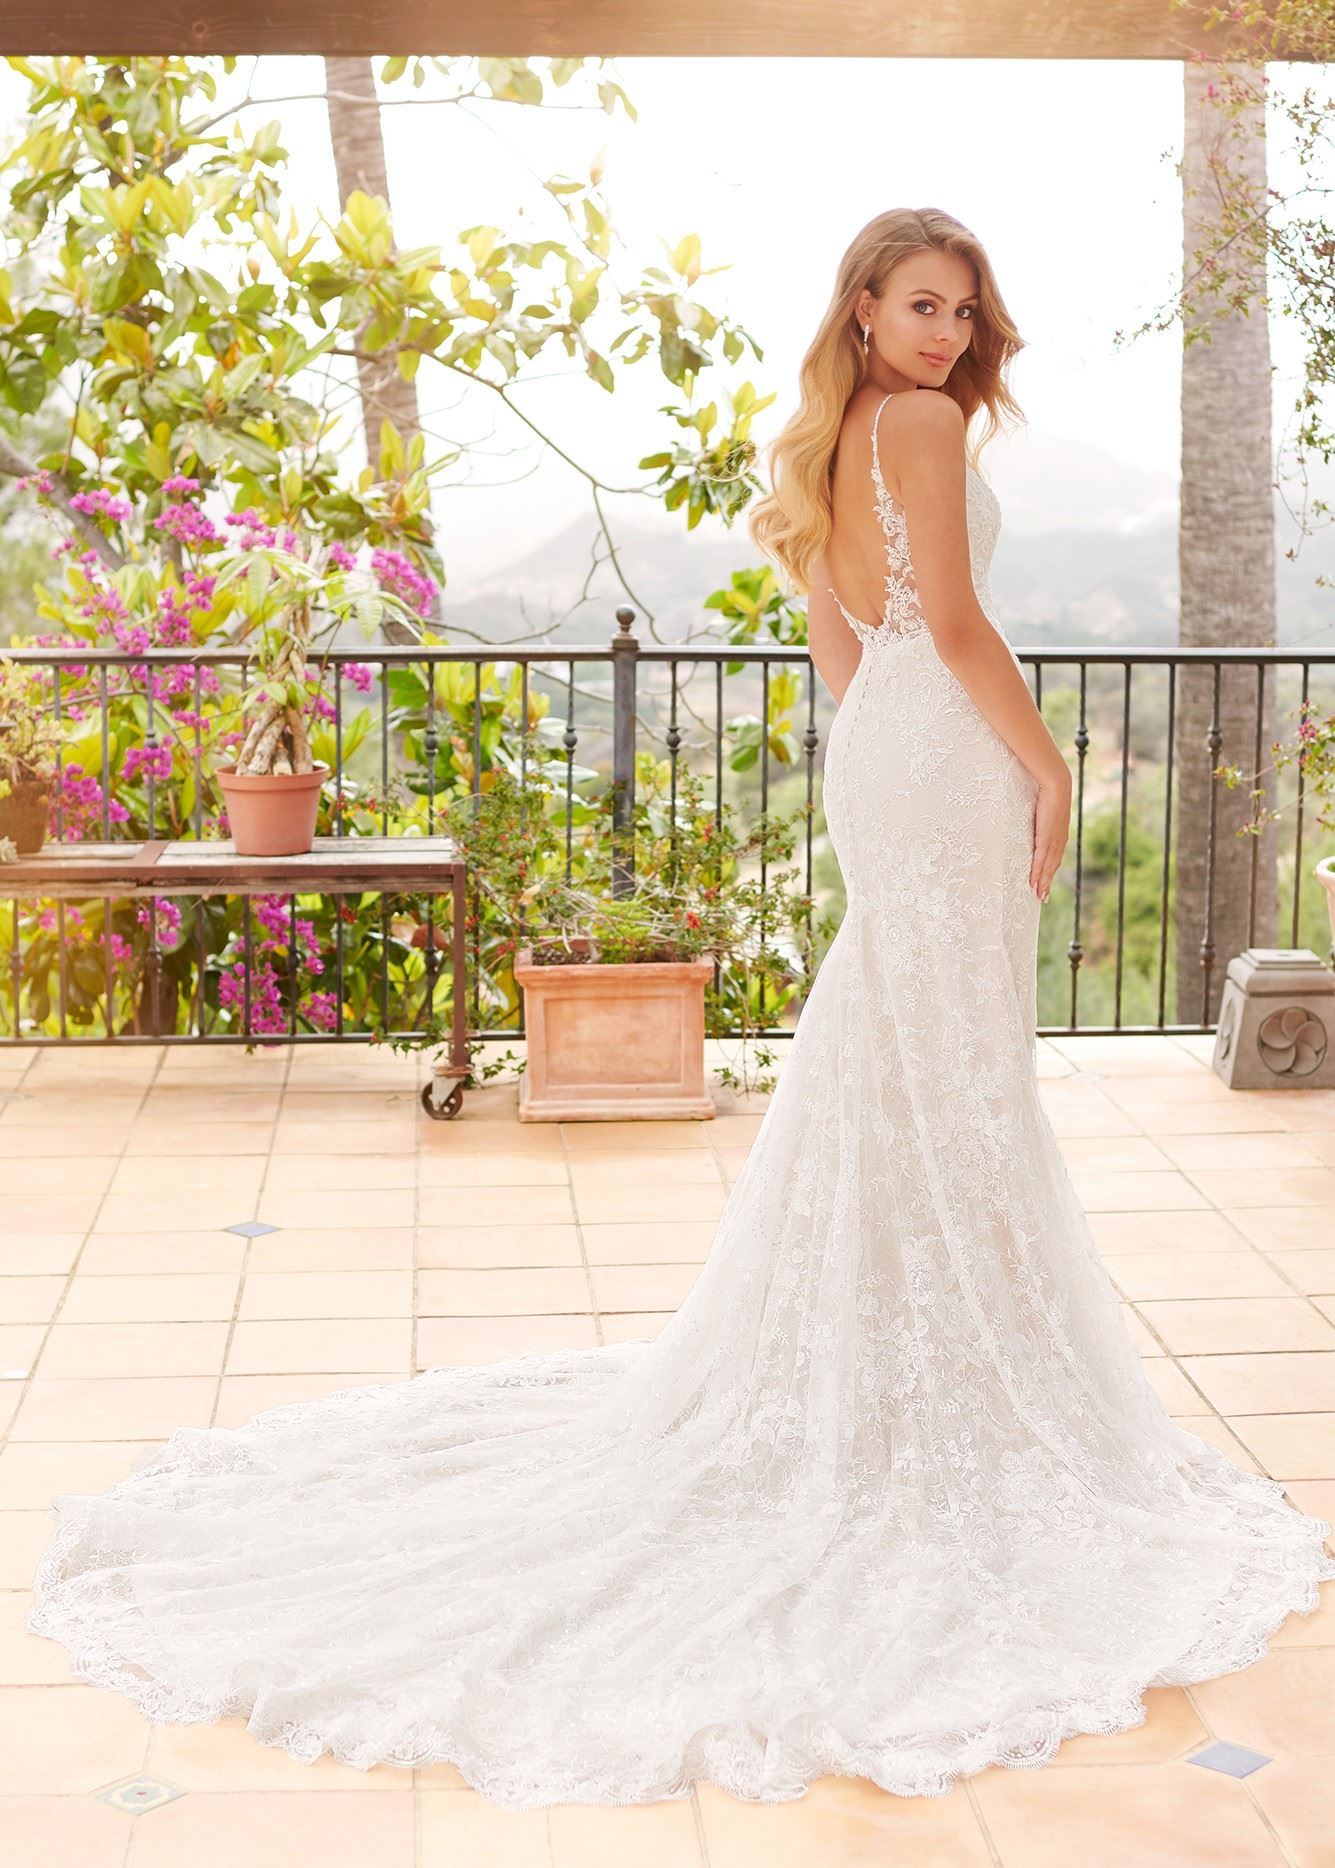 Bride in lace fit and flare wedding dress by Martin Thornburg